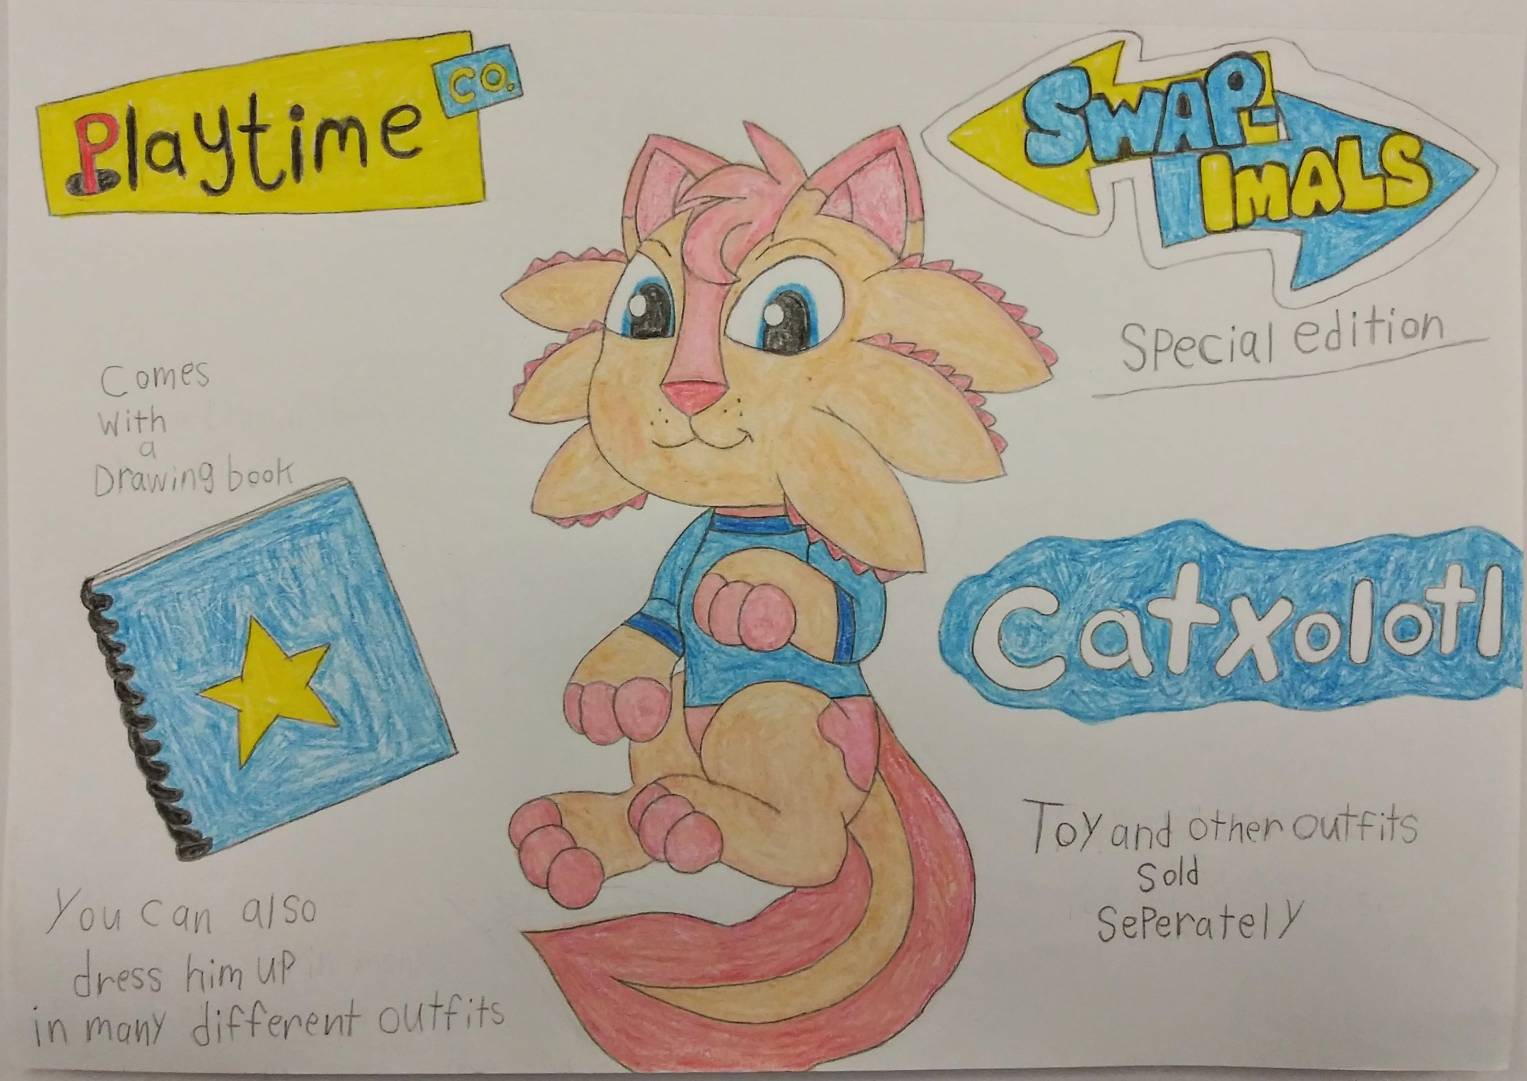 Catxolotl's Playtime Co ad by CreationPark on DeviantArt